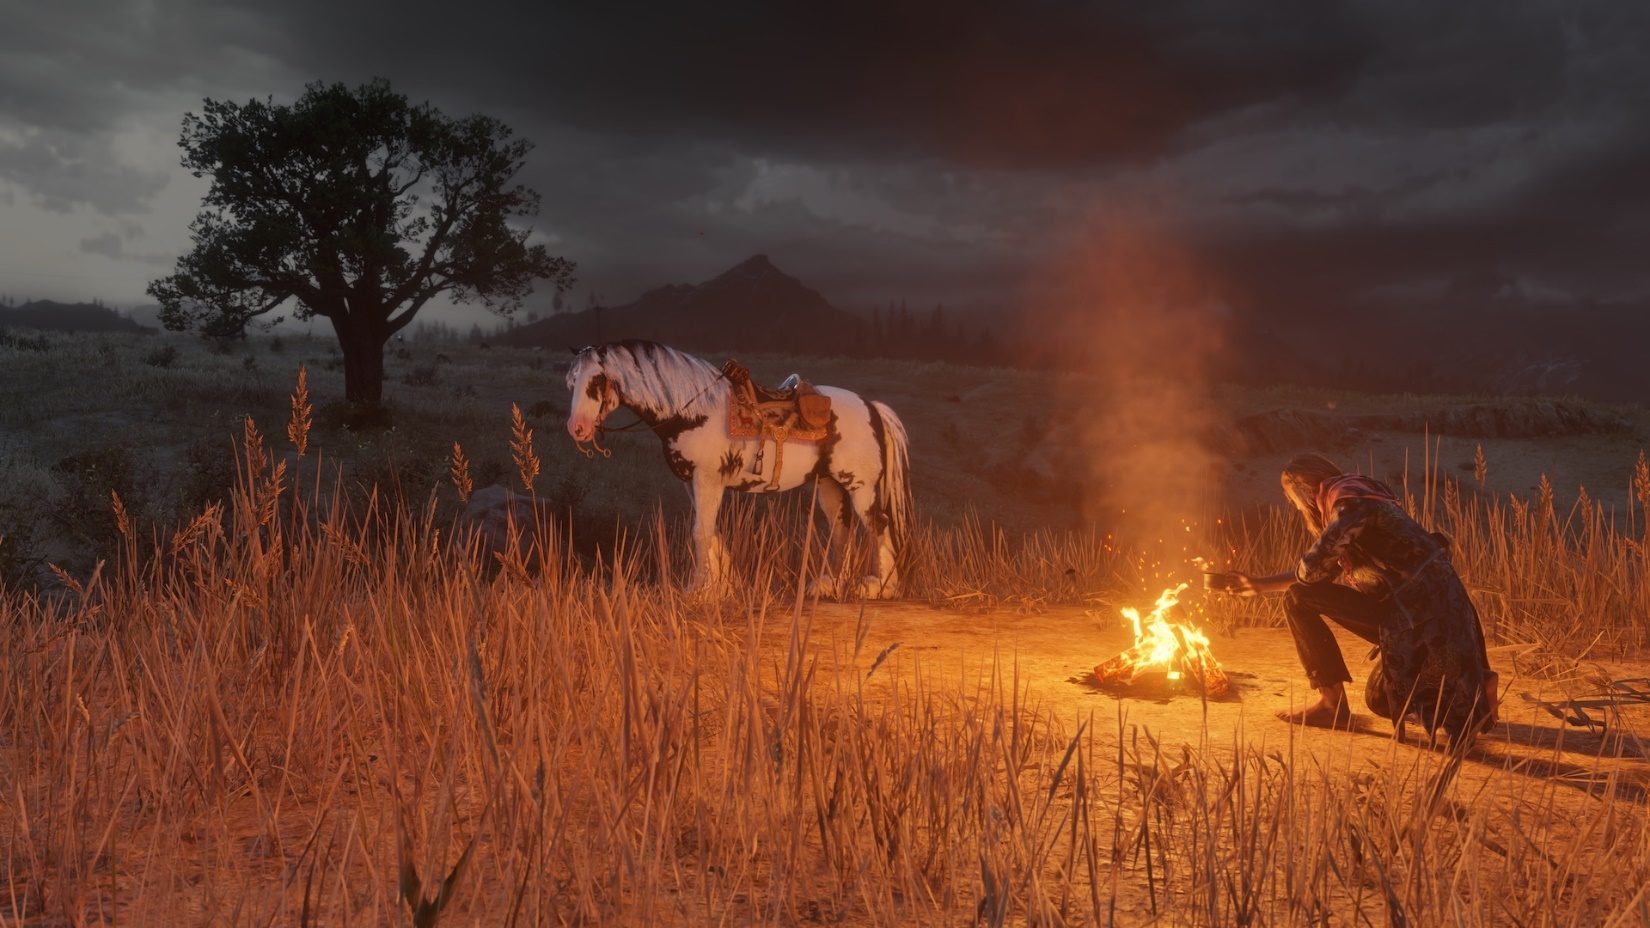 Red Dead Online Elephant Rifle: How to unlock and use the Naturalist Update  gun